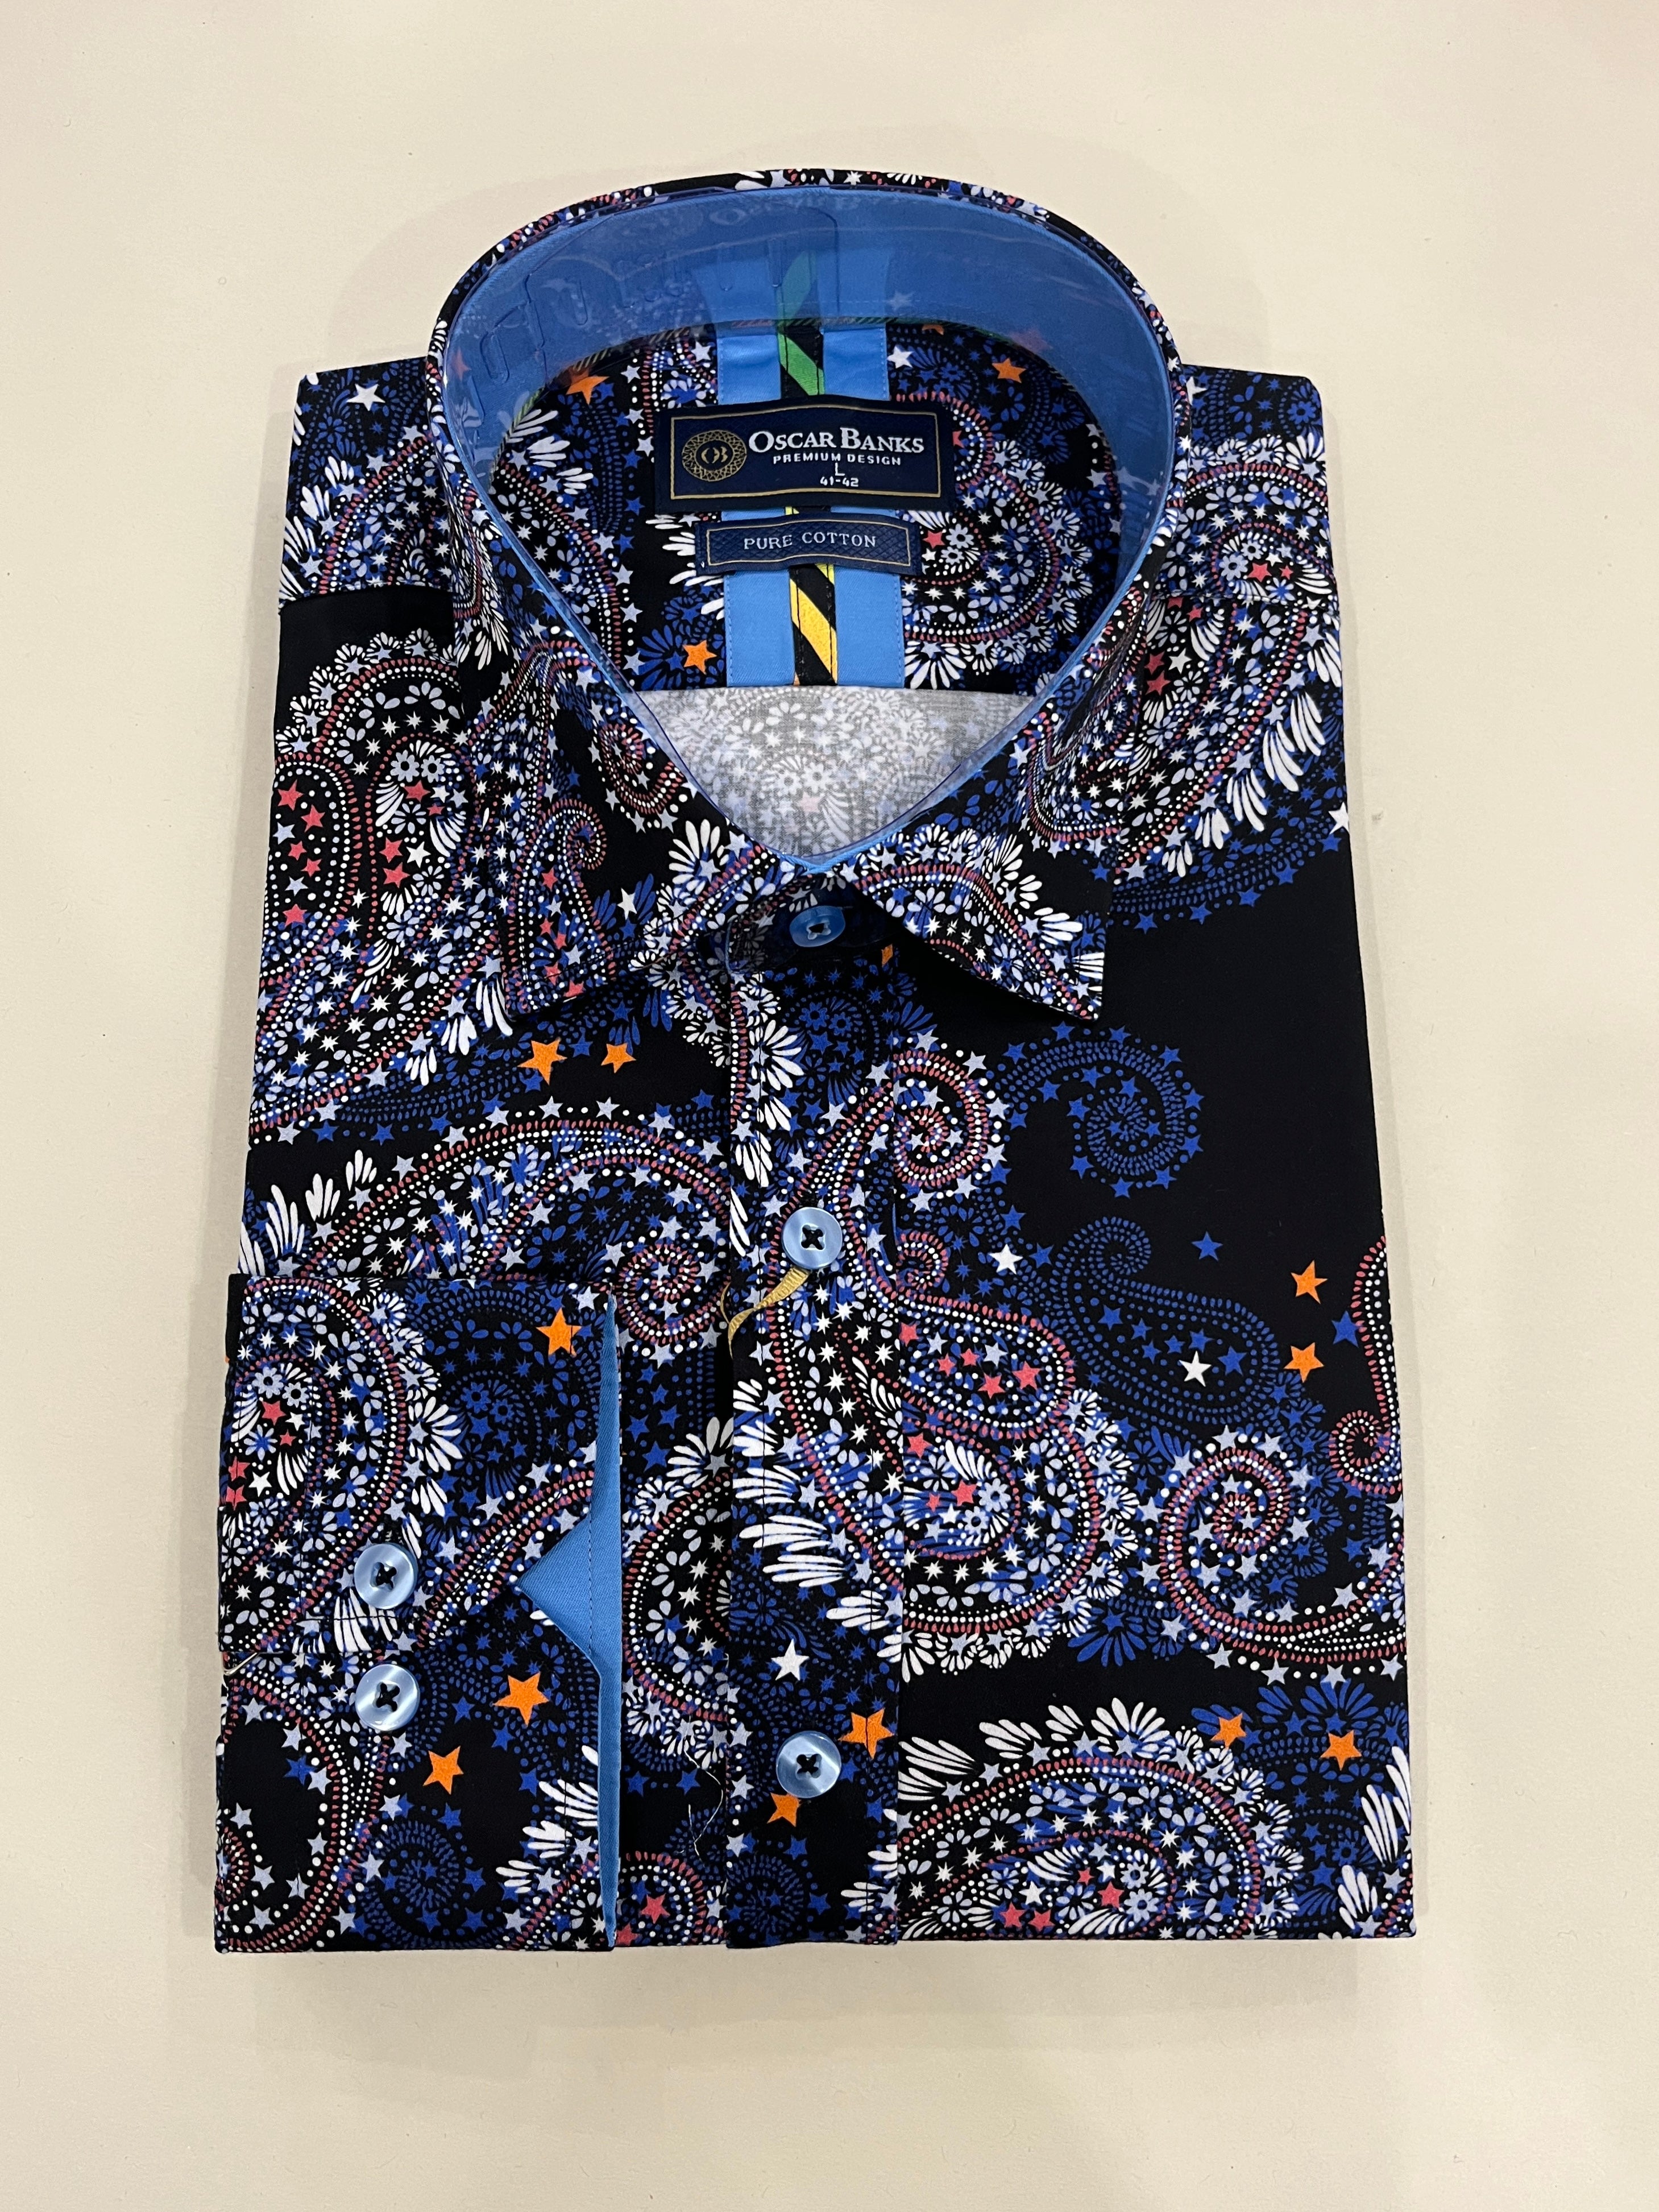 OSCAR BANKS BLUE, WHITE AND RED PAISLEY WITH ORANGE AND WHITE STAR PRINT BLACK SHIRT